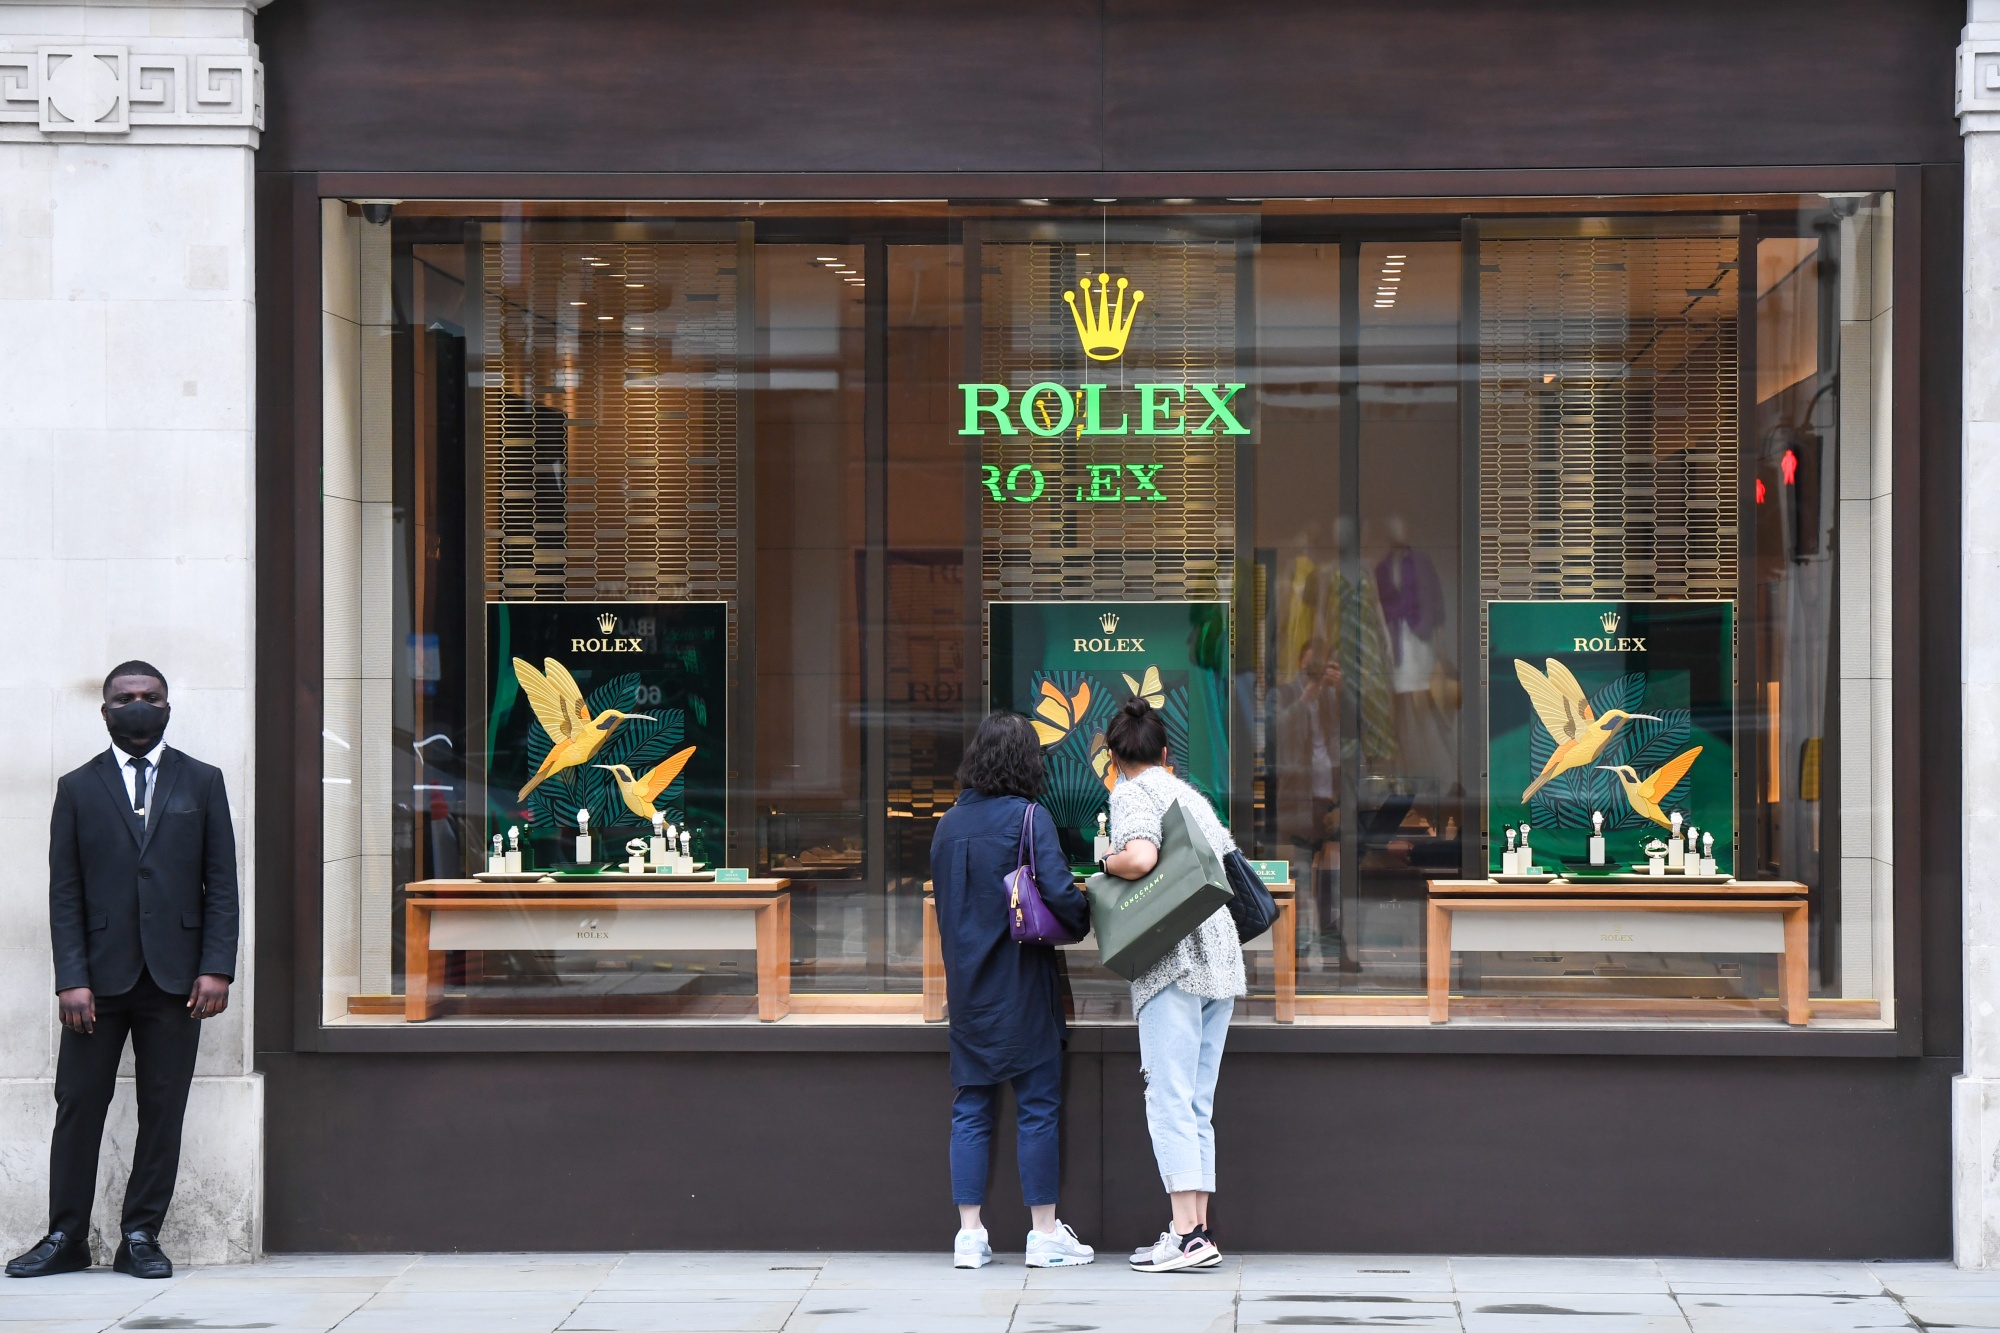 Watches of Switzerland Rolex Store in London to Move New Space 8 Times Bigger - Bloomberg